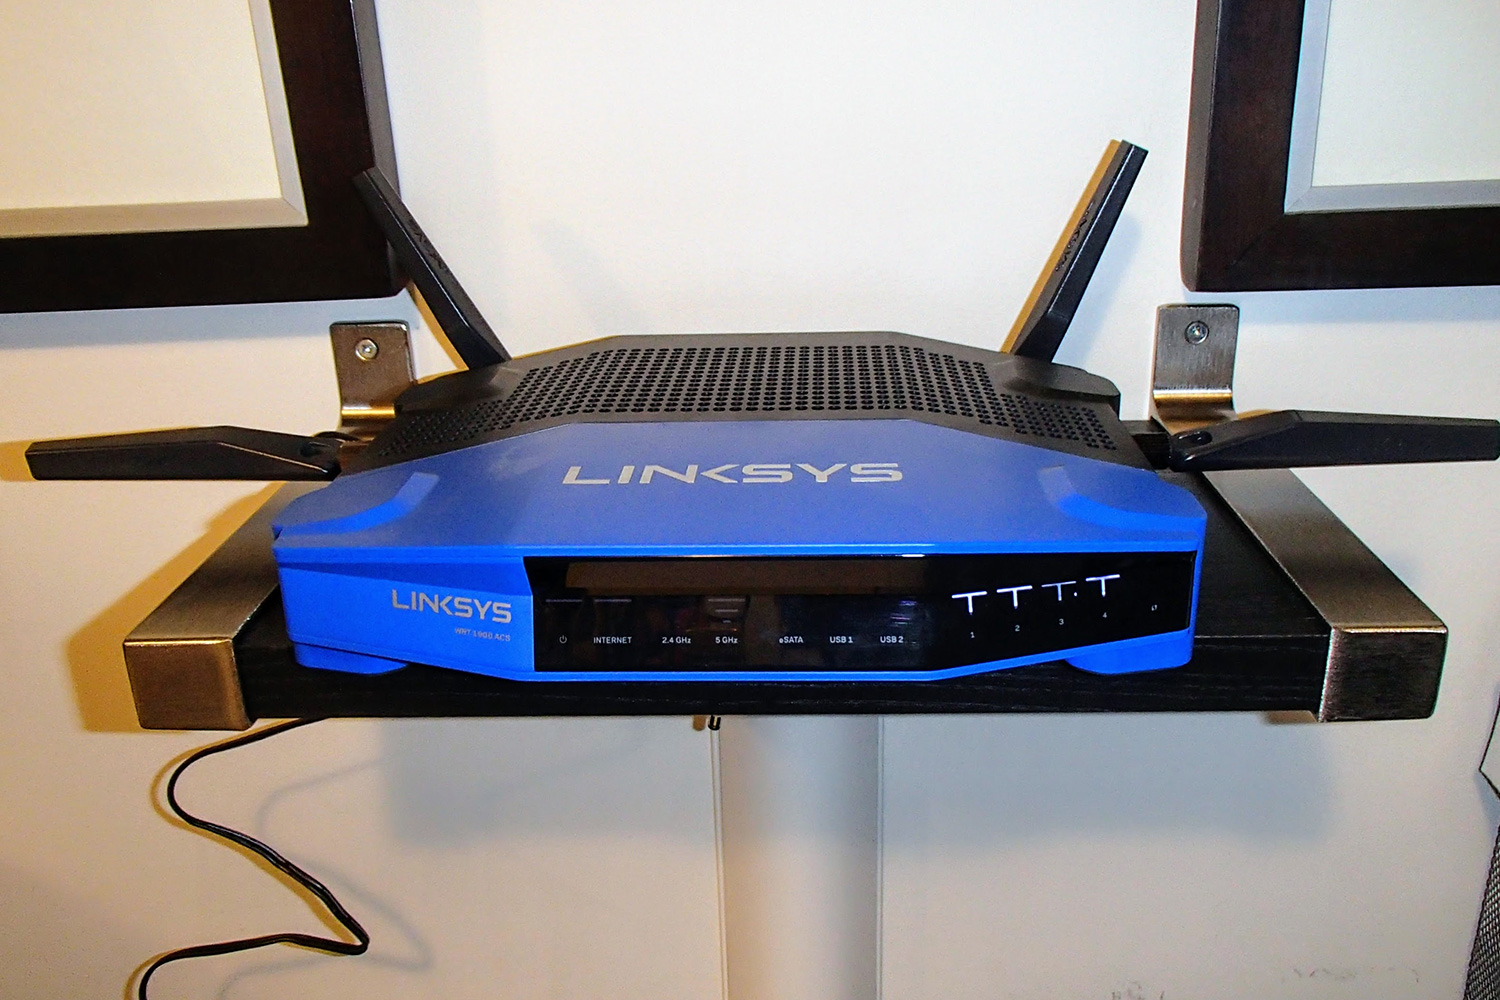 Linksys's new Wi-Fi 6 router can take in a 5G SIM card to deliver